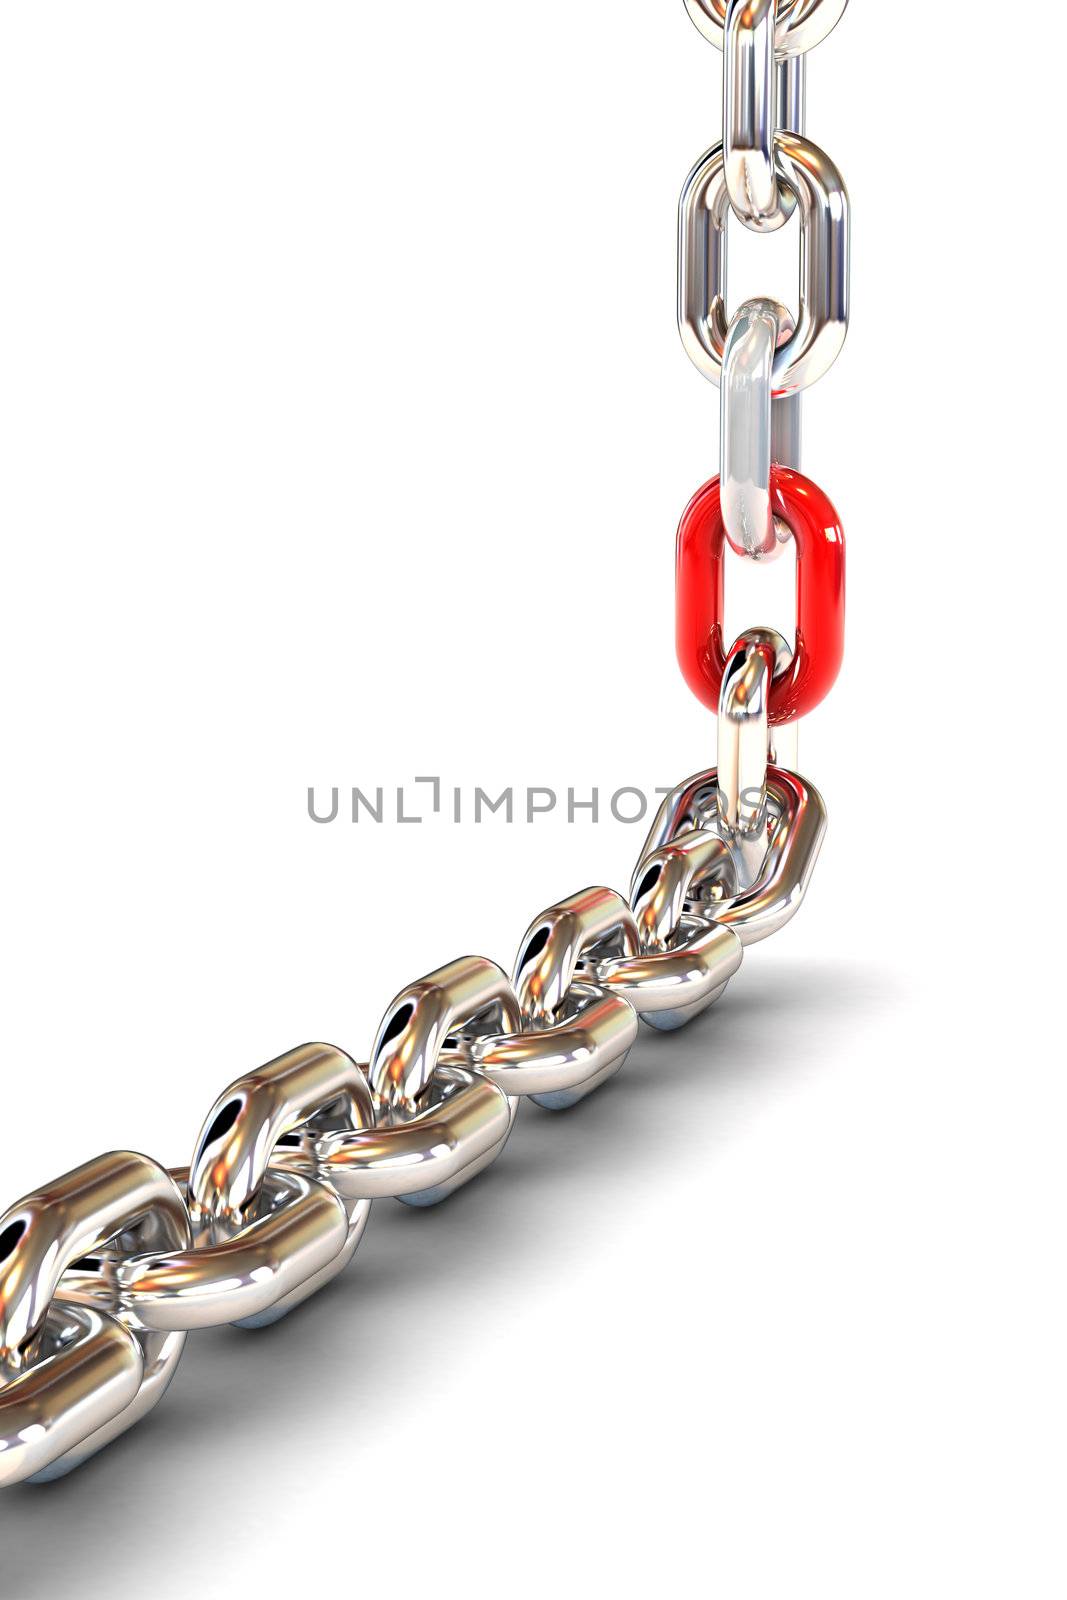 A Colourful 3d Rendered Chain / Teamwork Illustration